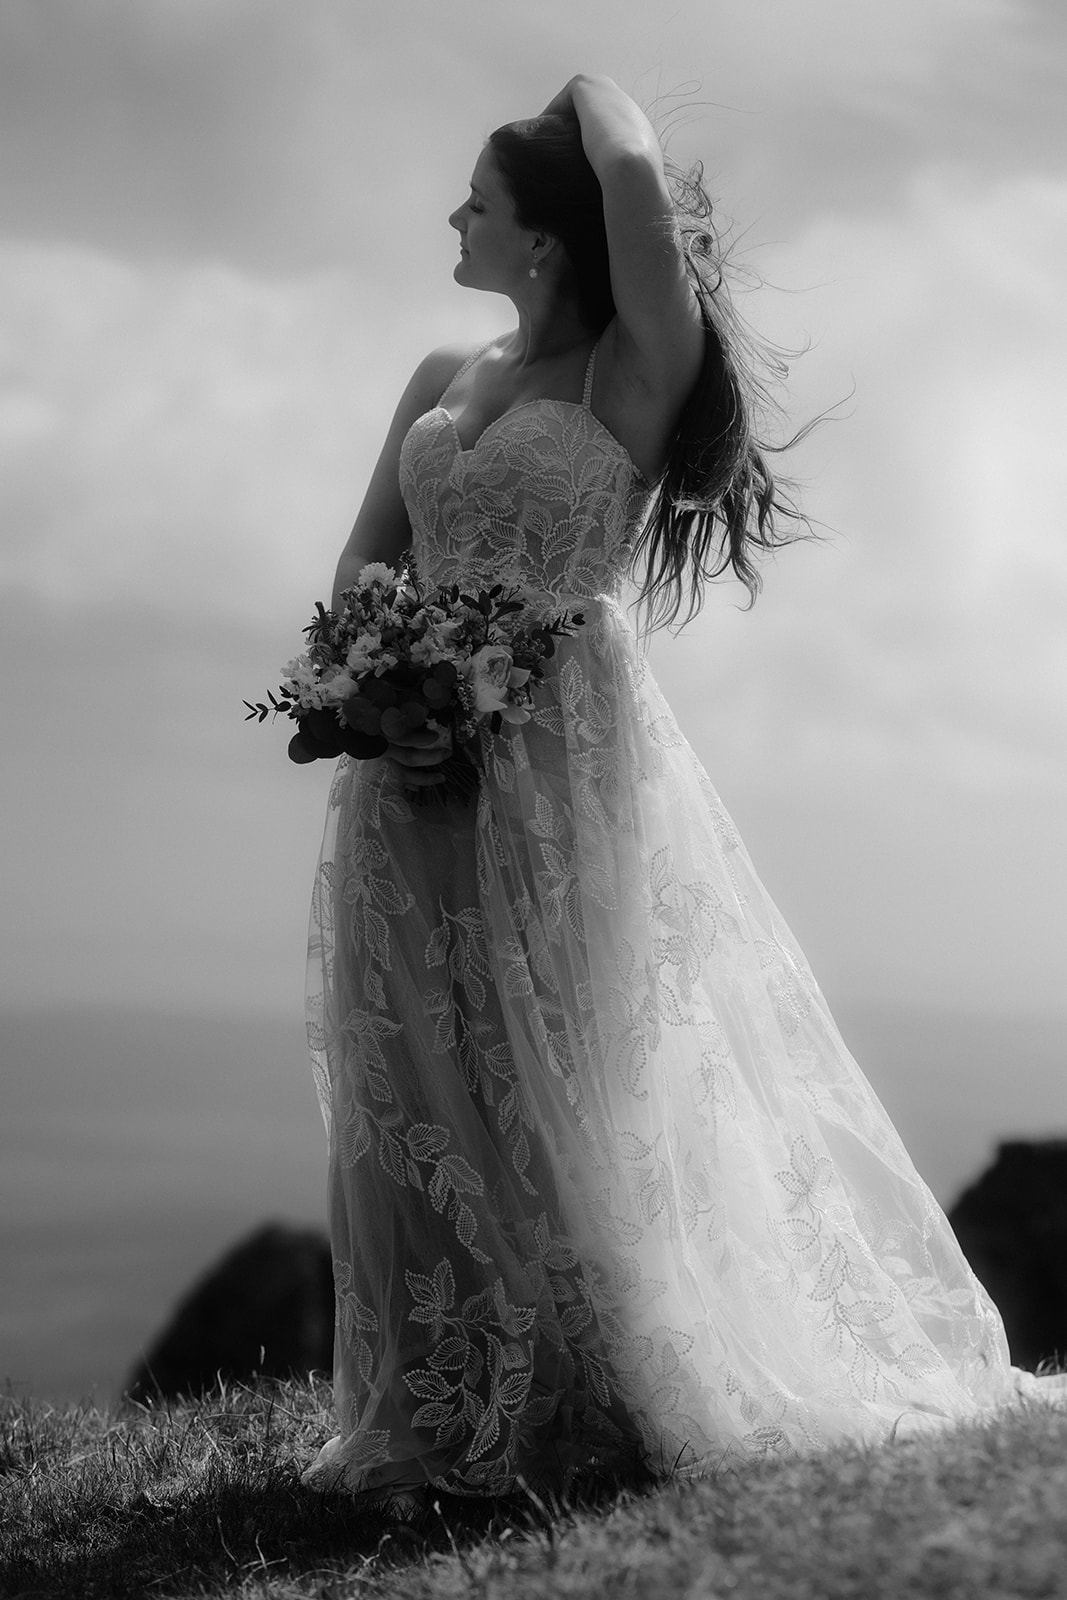 Emma and her beautiful elopement dress for her Quiraing, Isle of Skye elopement